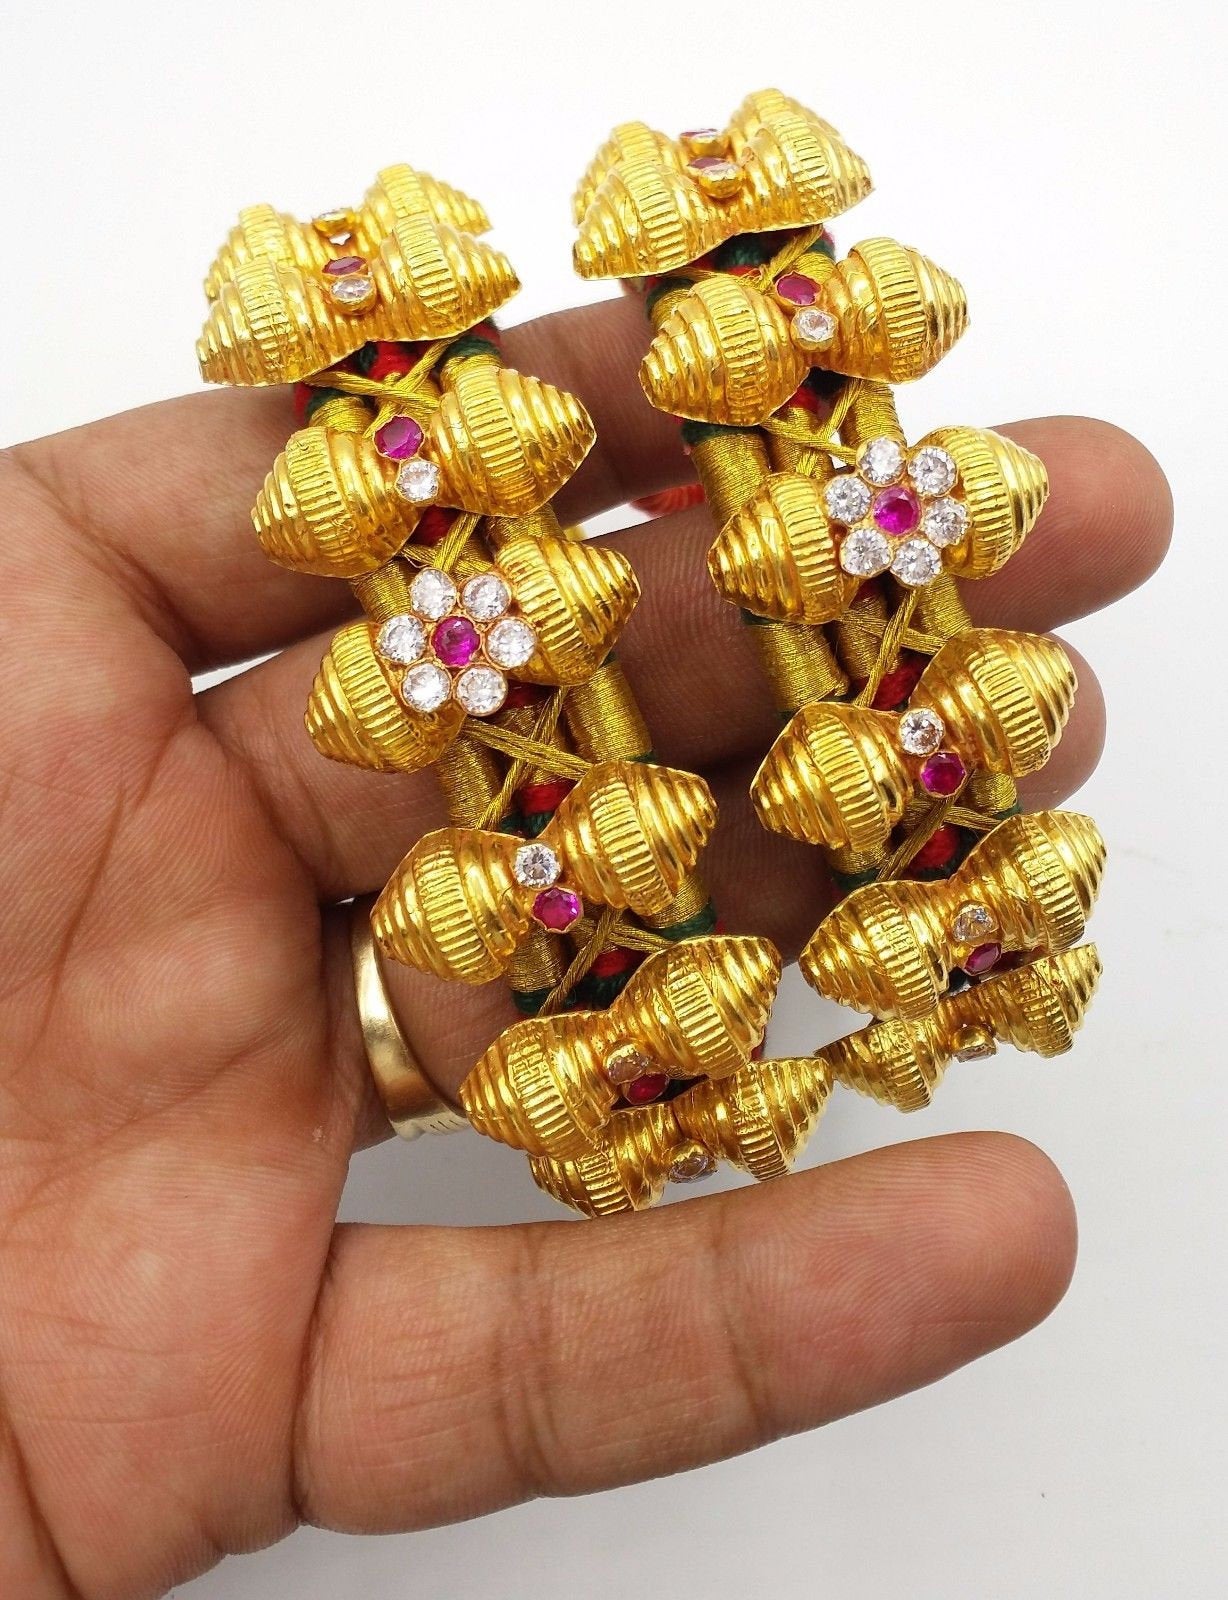 Vintage antique design handmade fabulous cuff bracelet 20 karat yellow gold tribal belly dance jewelry from rajasthan india - TRIBAL ORNAMENTS